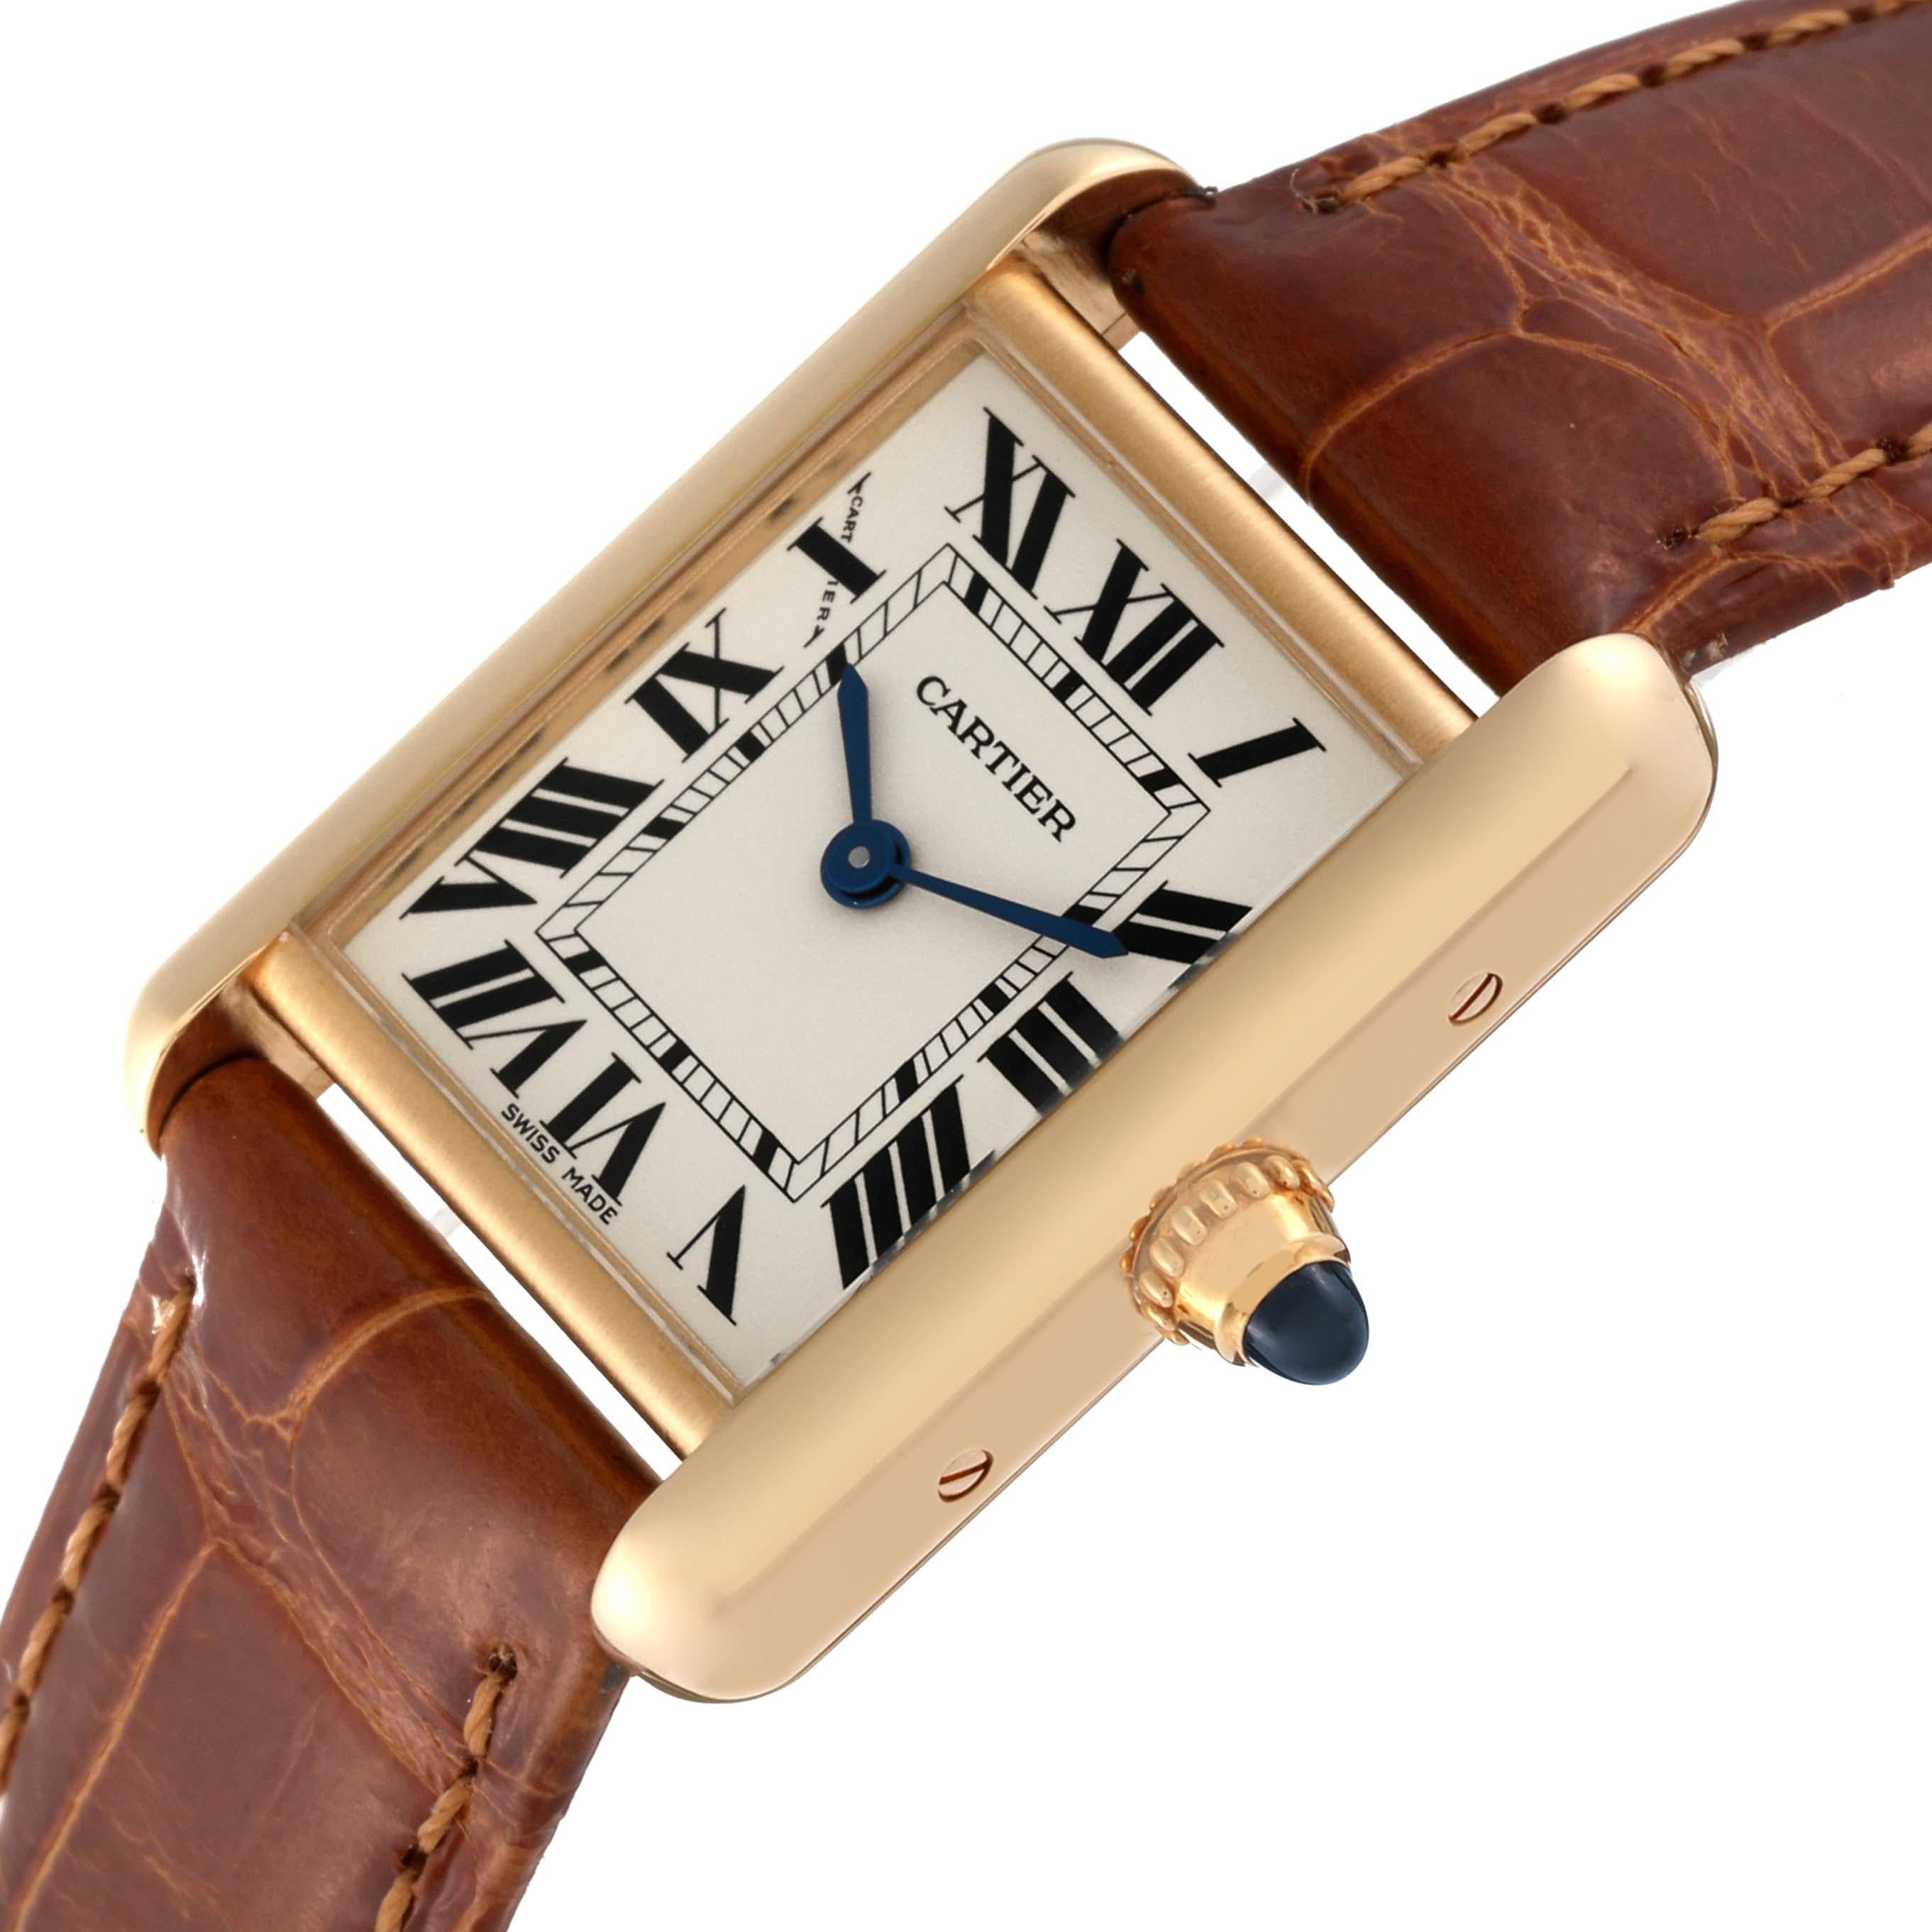 Cartier Tank Louis Small Yellow Gold Brown Strap Ladies Watch W1529856 Papers en vente 2